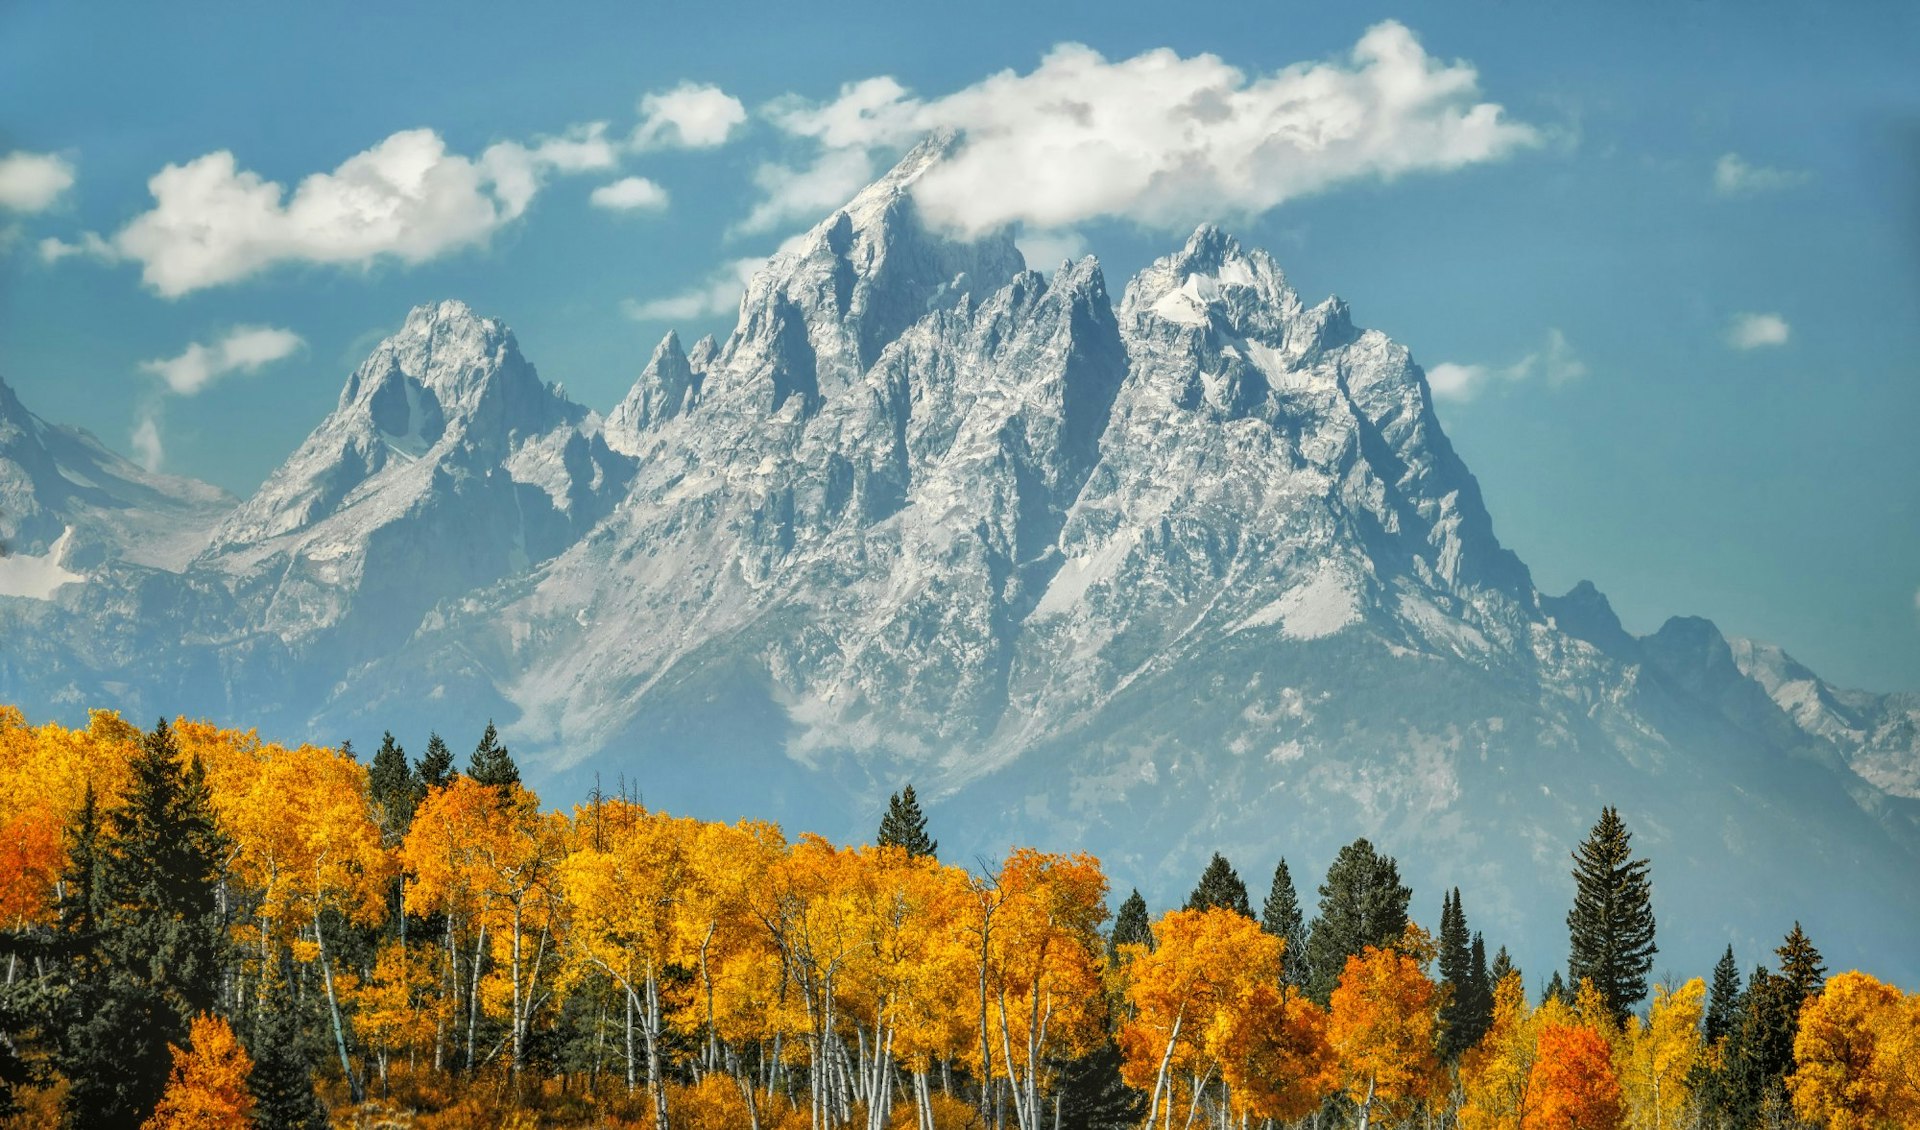 View of aspen trees in yellow and gold fall foliage with snow-capped Grand Teton mountains in distance